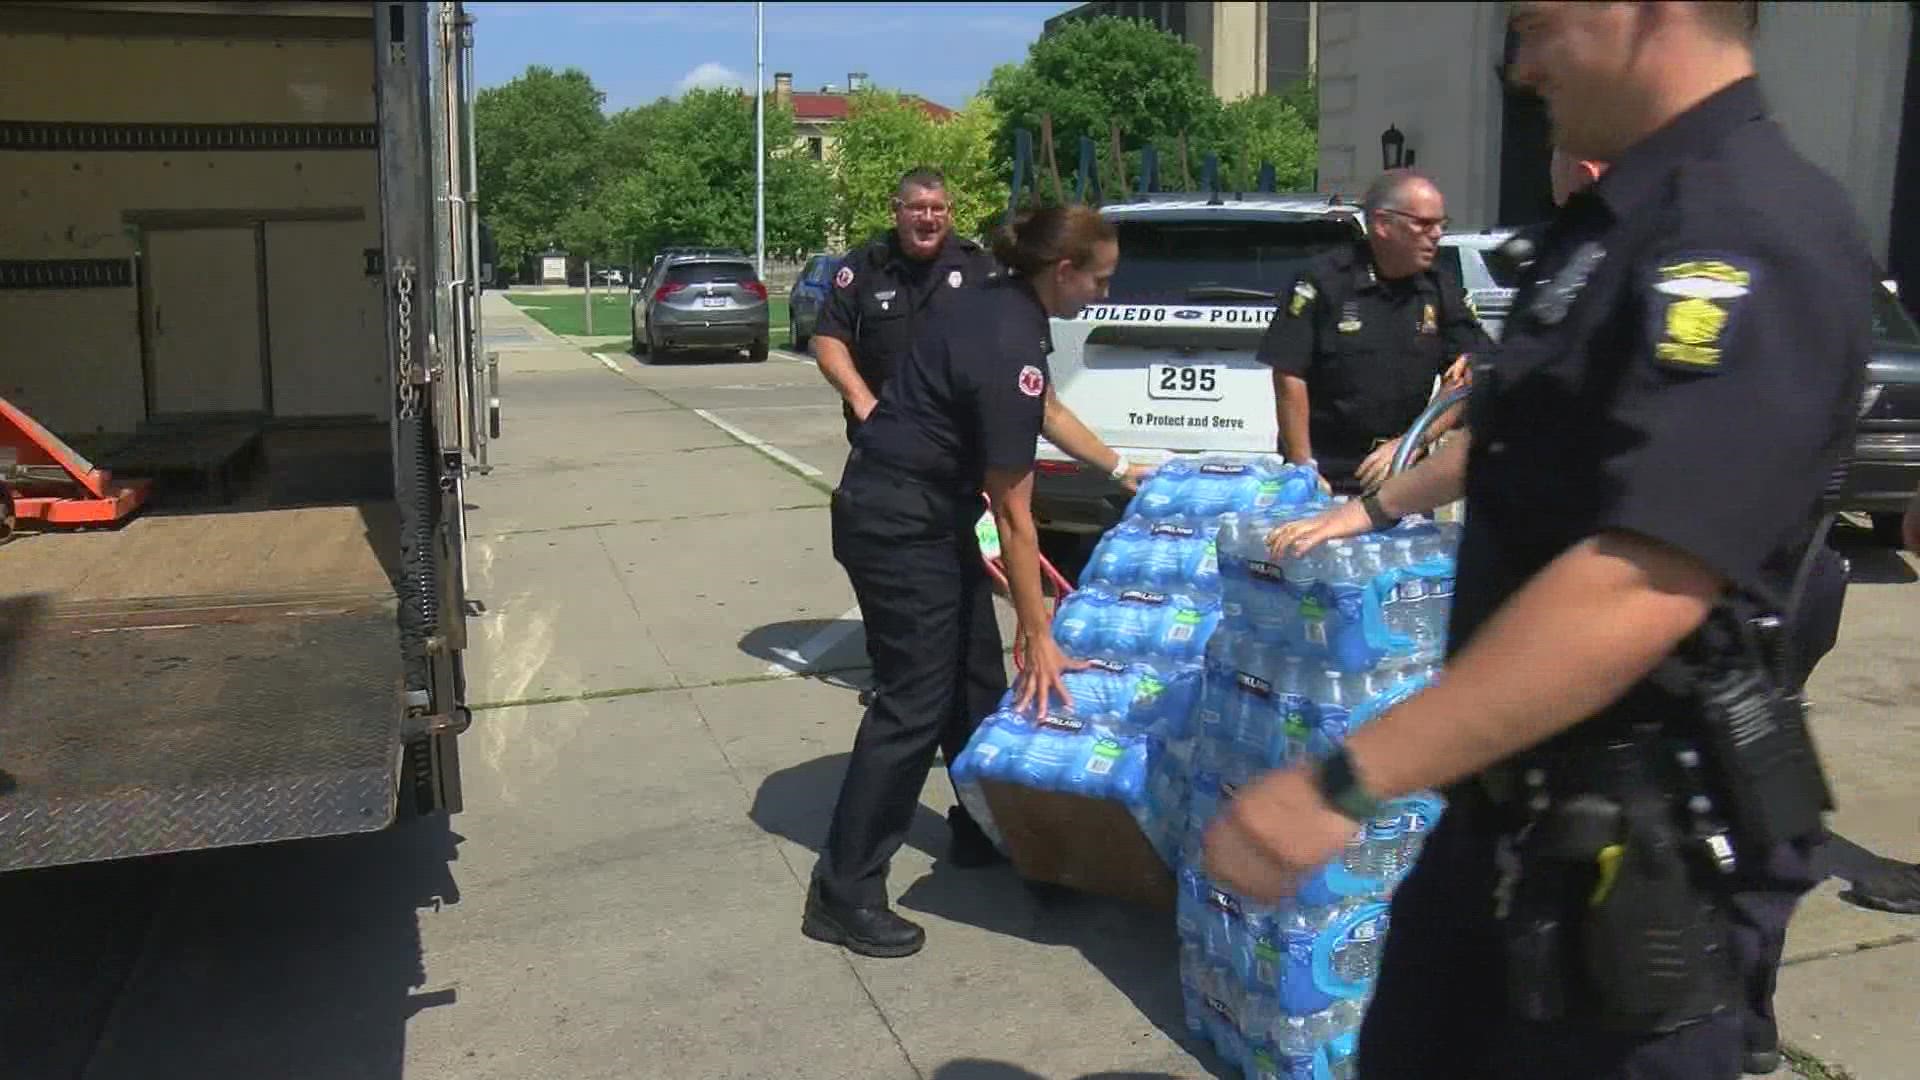 Mercy Health and Toledo first responders want to remind residents to stay hydrated to stay safe in extreme heat.